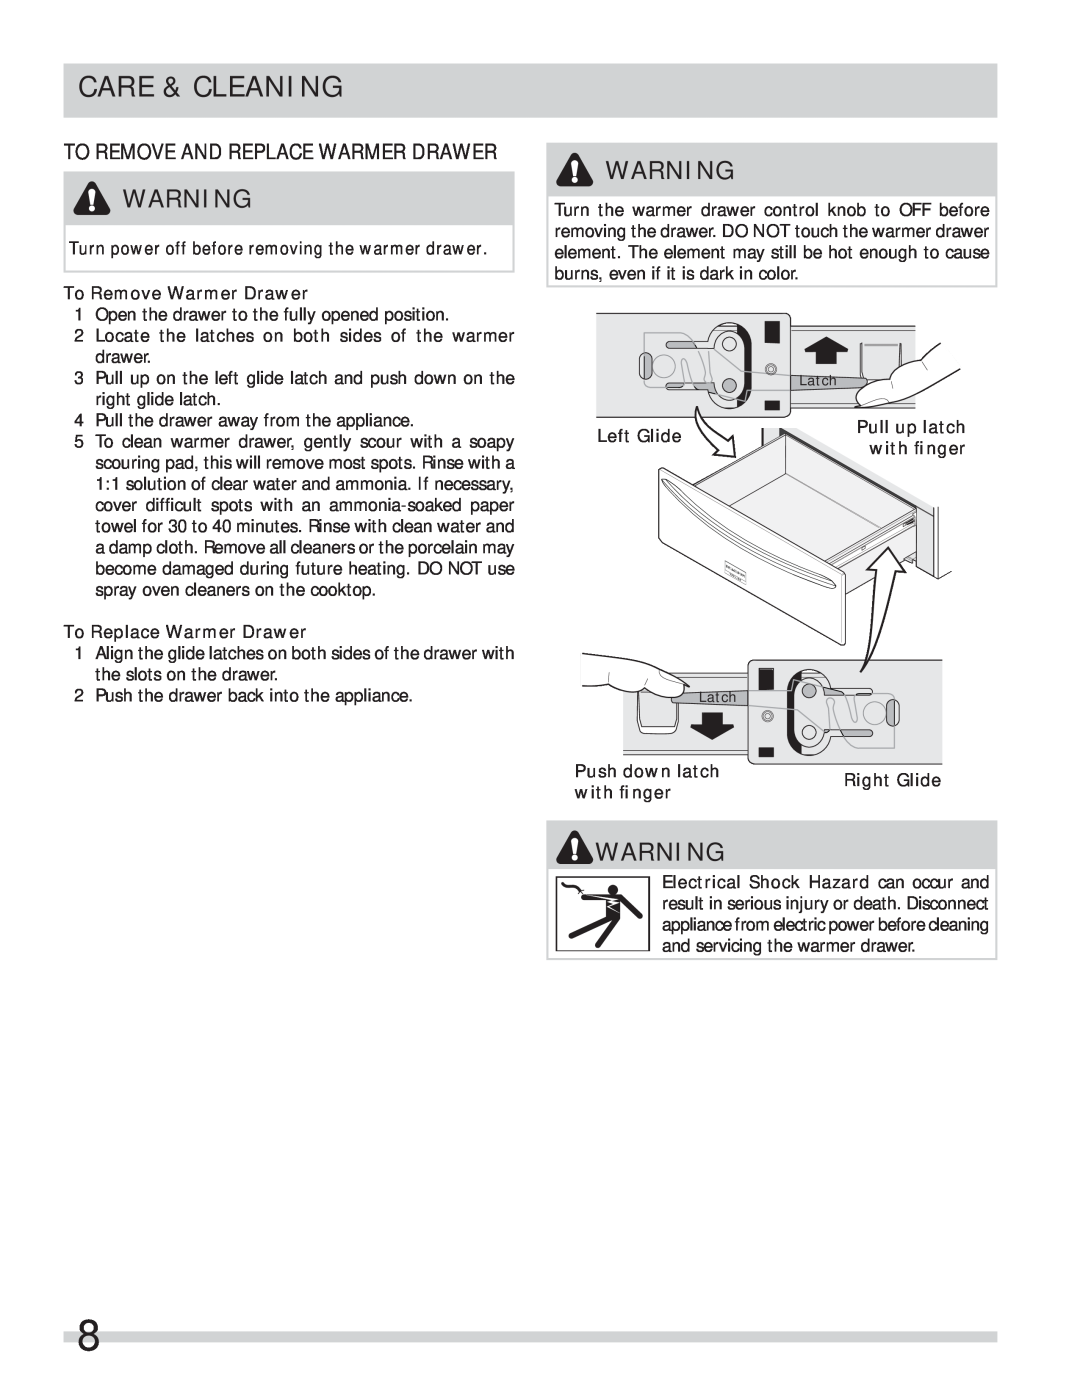 Frigidaire 318201028 important safety instructions Care & Cleaning, To Remove And Replace Warmer Drawer 